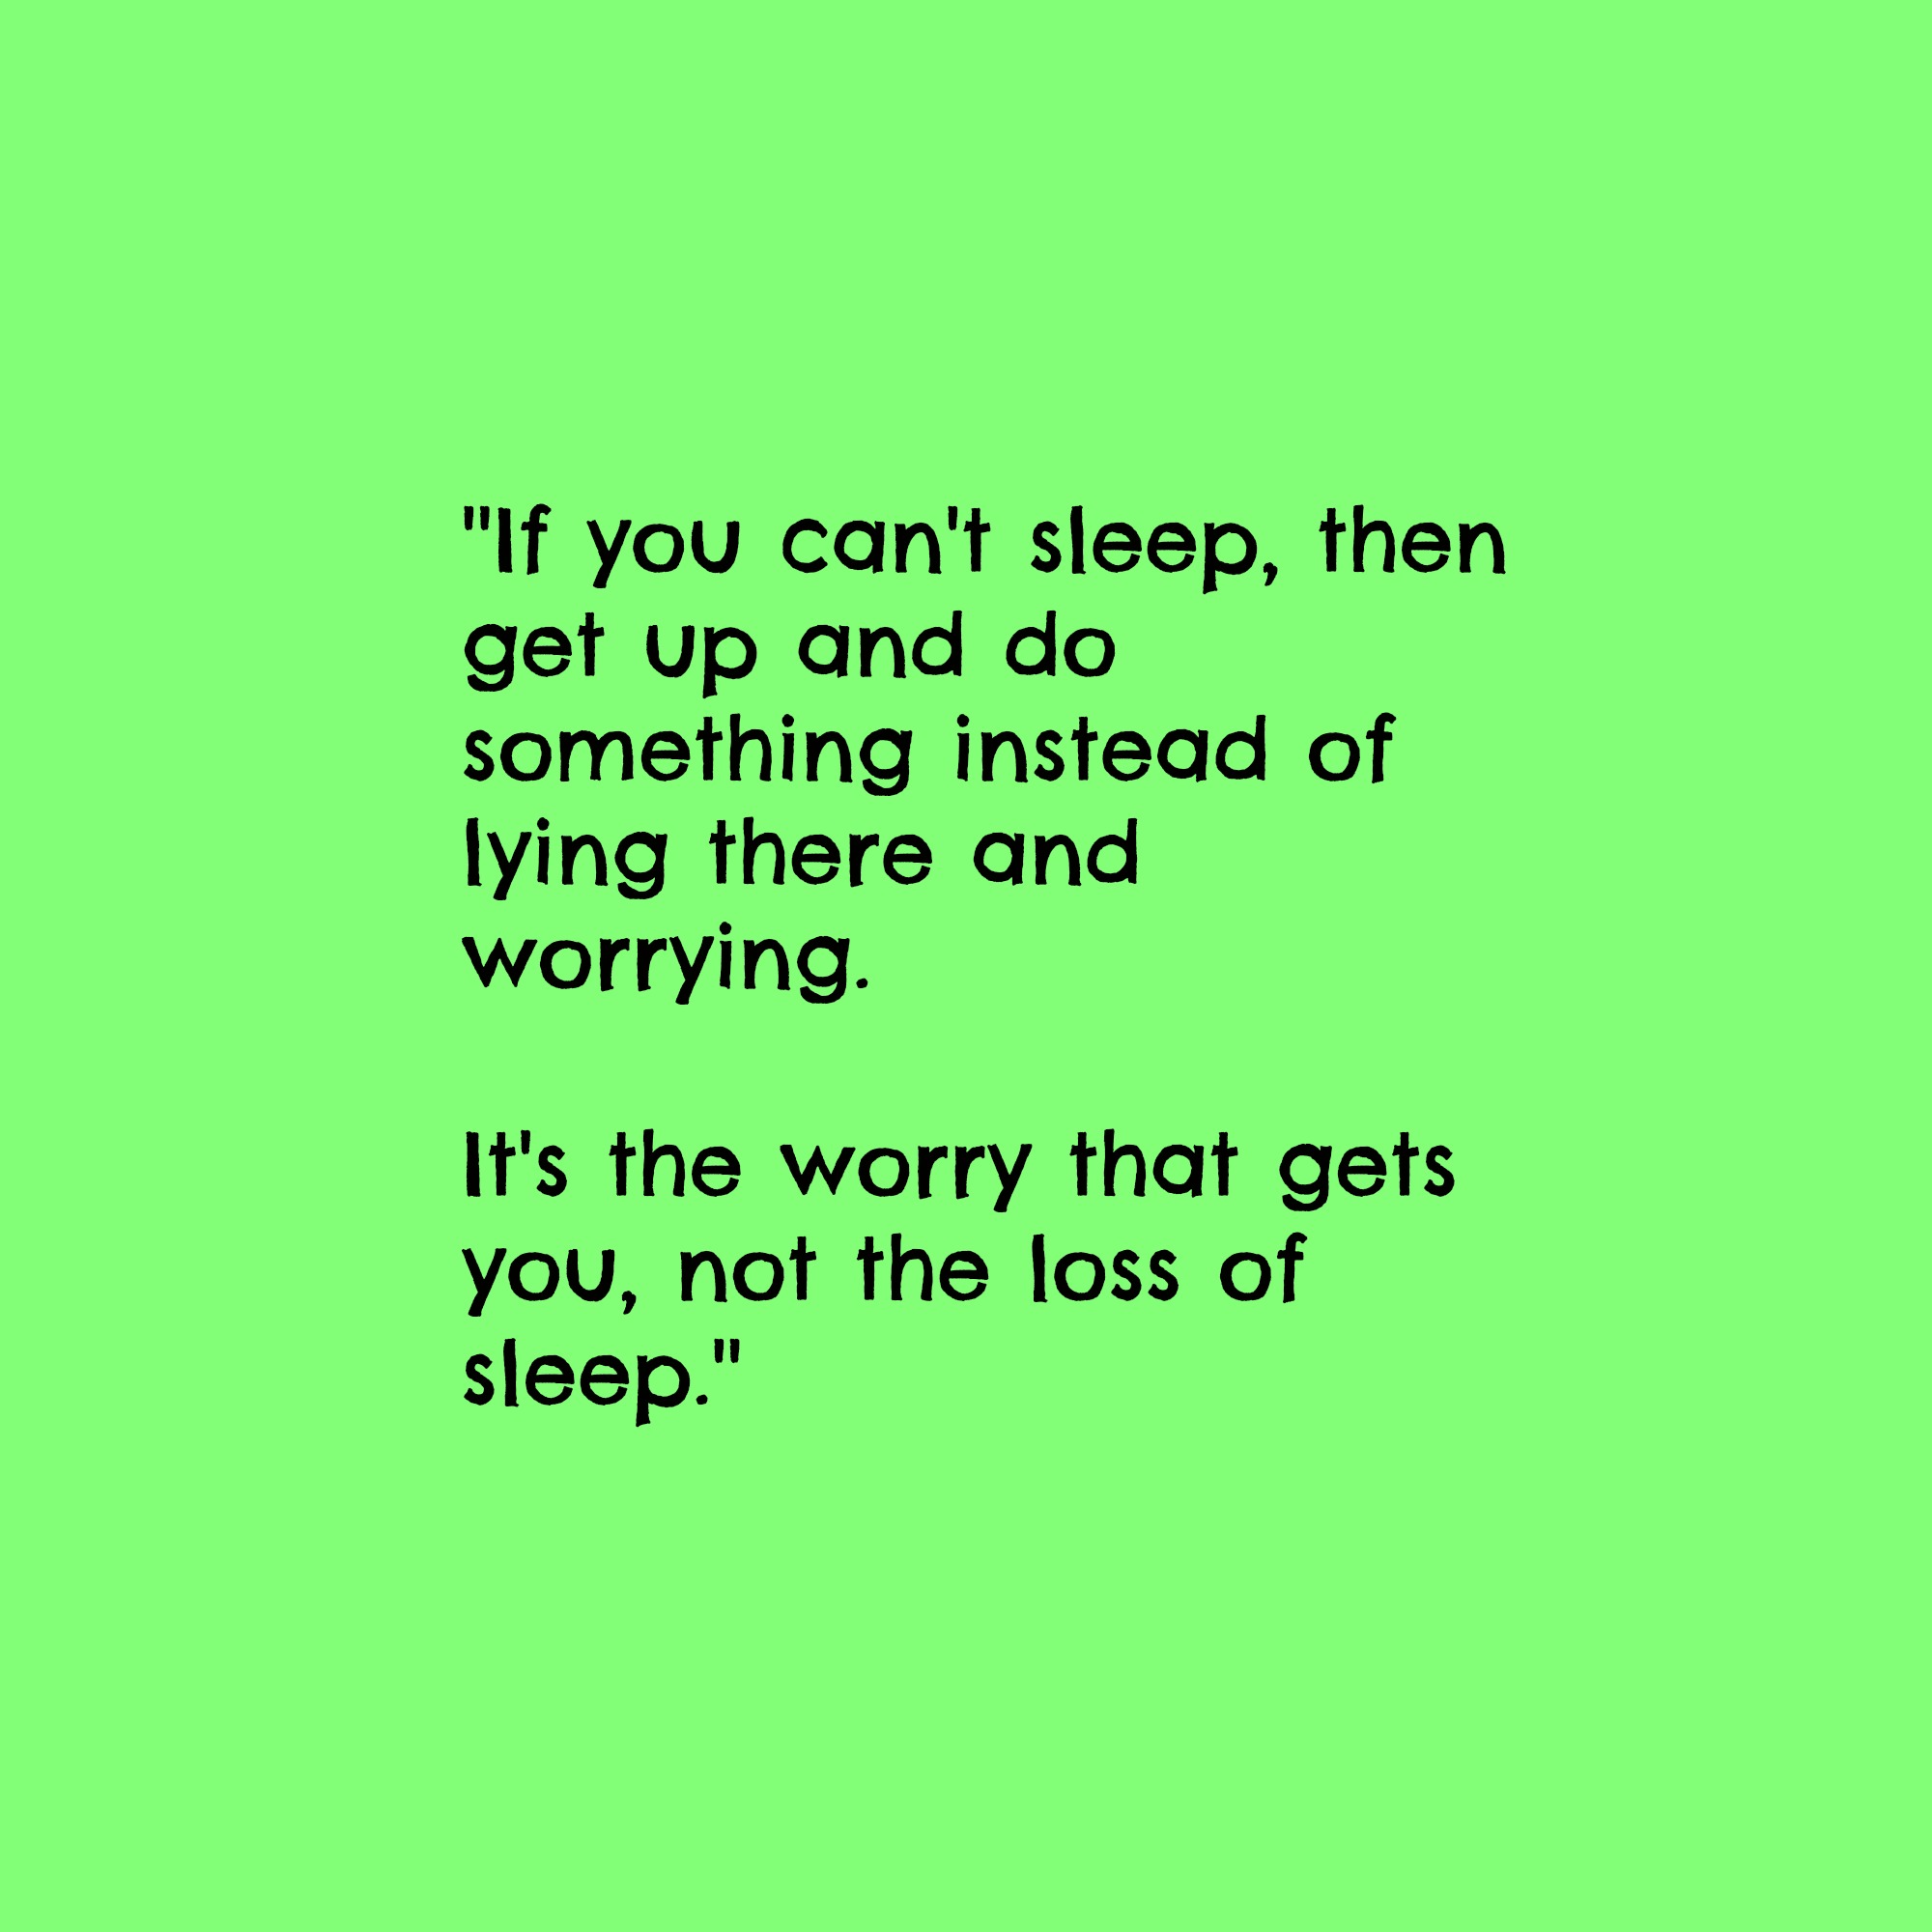 Ways to Stop Worrying - Do Something About It - Don't Lose Sleep